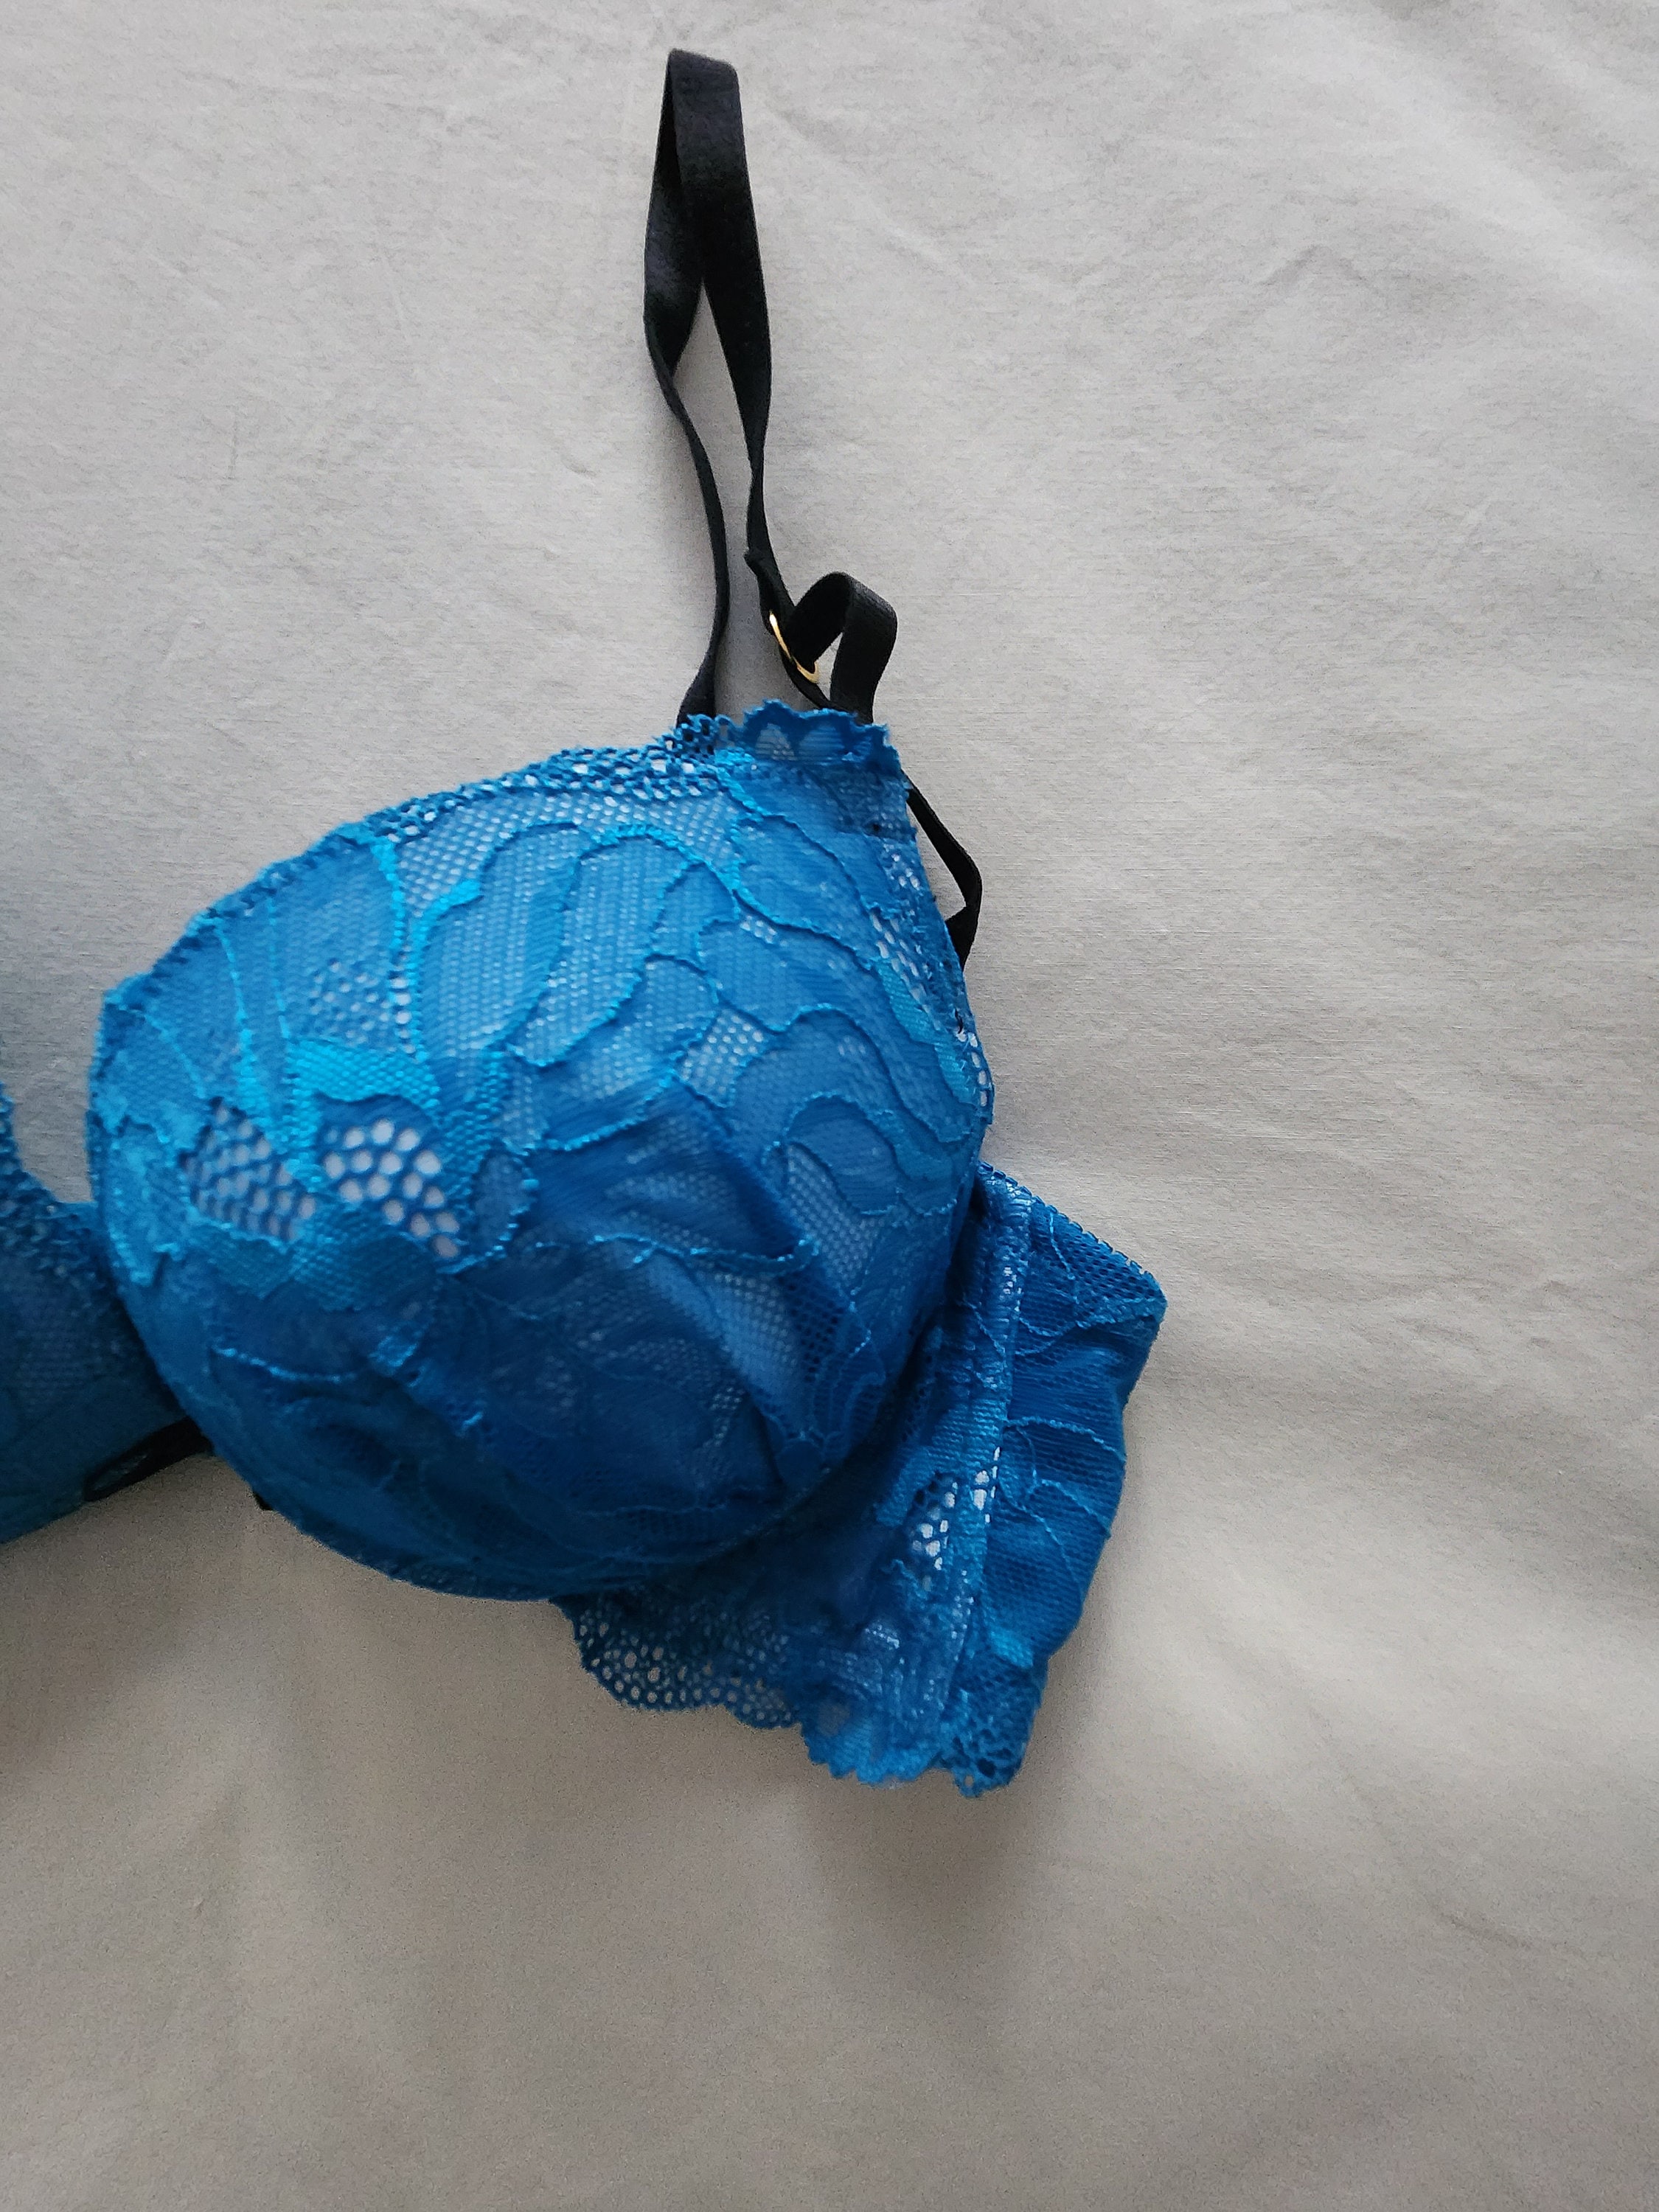 Vintage New Old Stock Push up Bra From Japan size 10B Aus & 32B UK